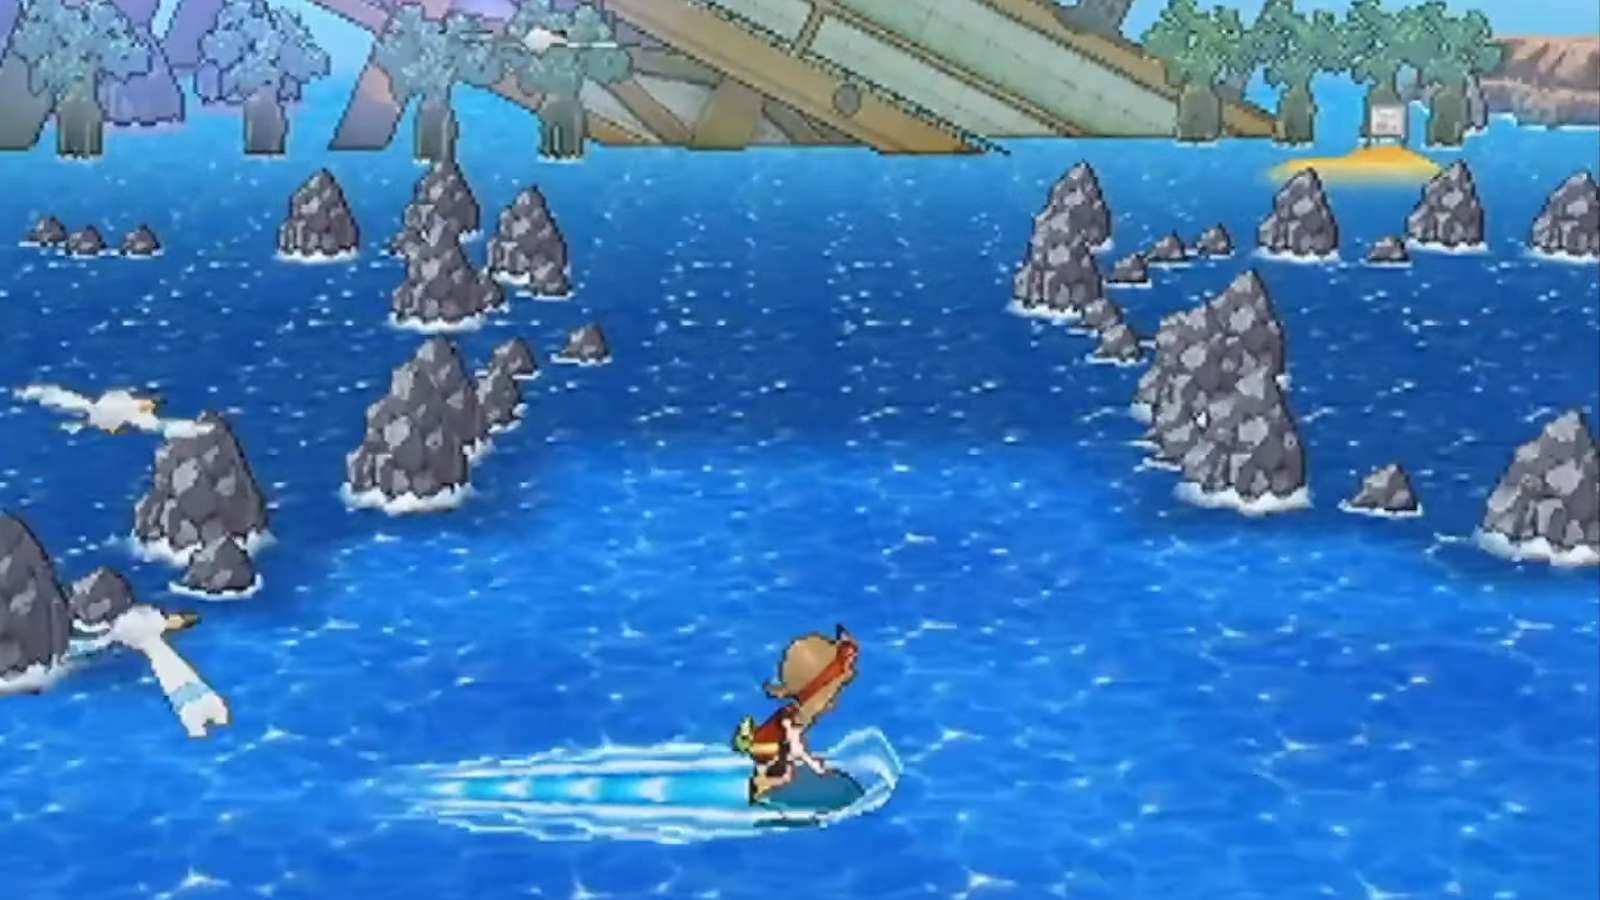 Protagonist May surfing in Pokemon Omega Ruby and Alpha Sapphire.